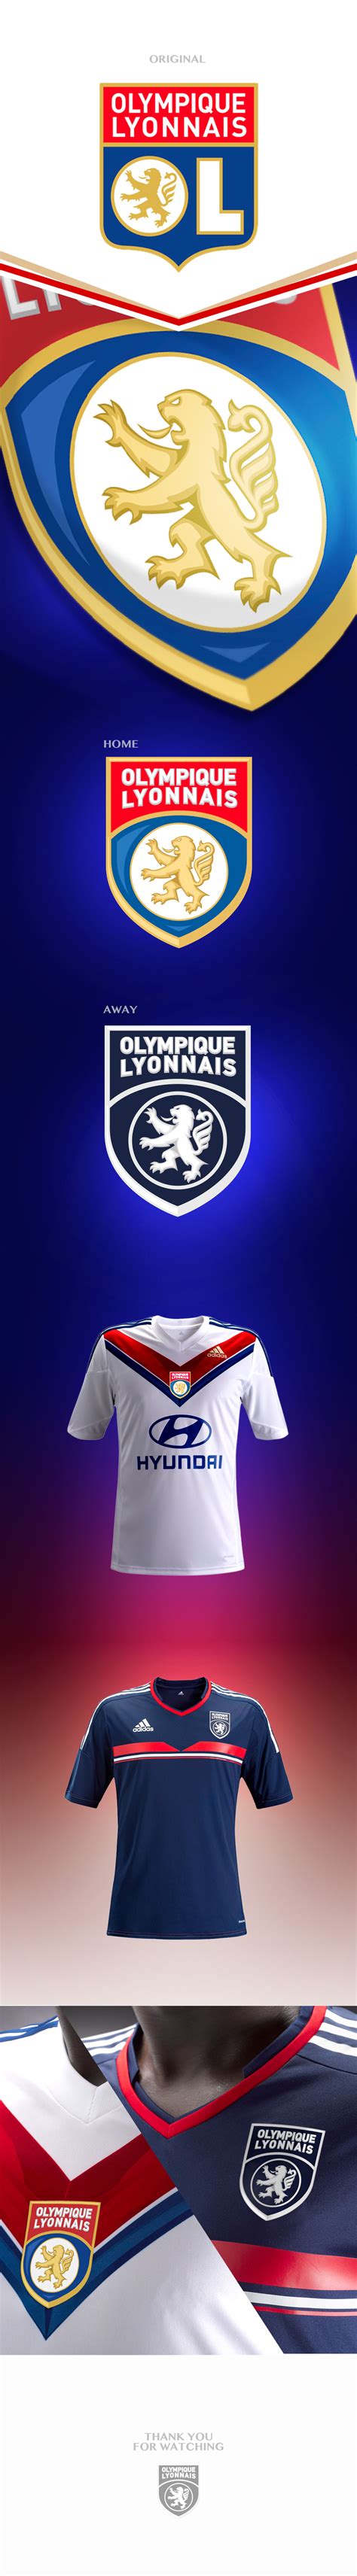 The association football (soccer) tournament at the 1984 summer olympics started on july 29 and ended on august 11. Concept logo of Olympic Lyonnais Football Club. | Fútbol ...